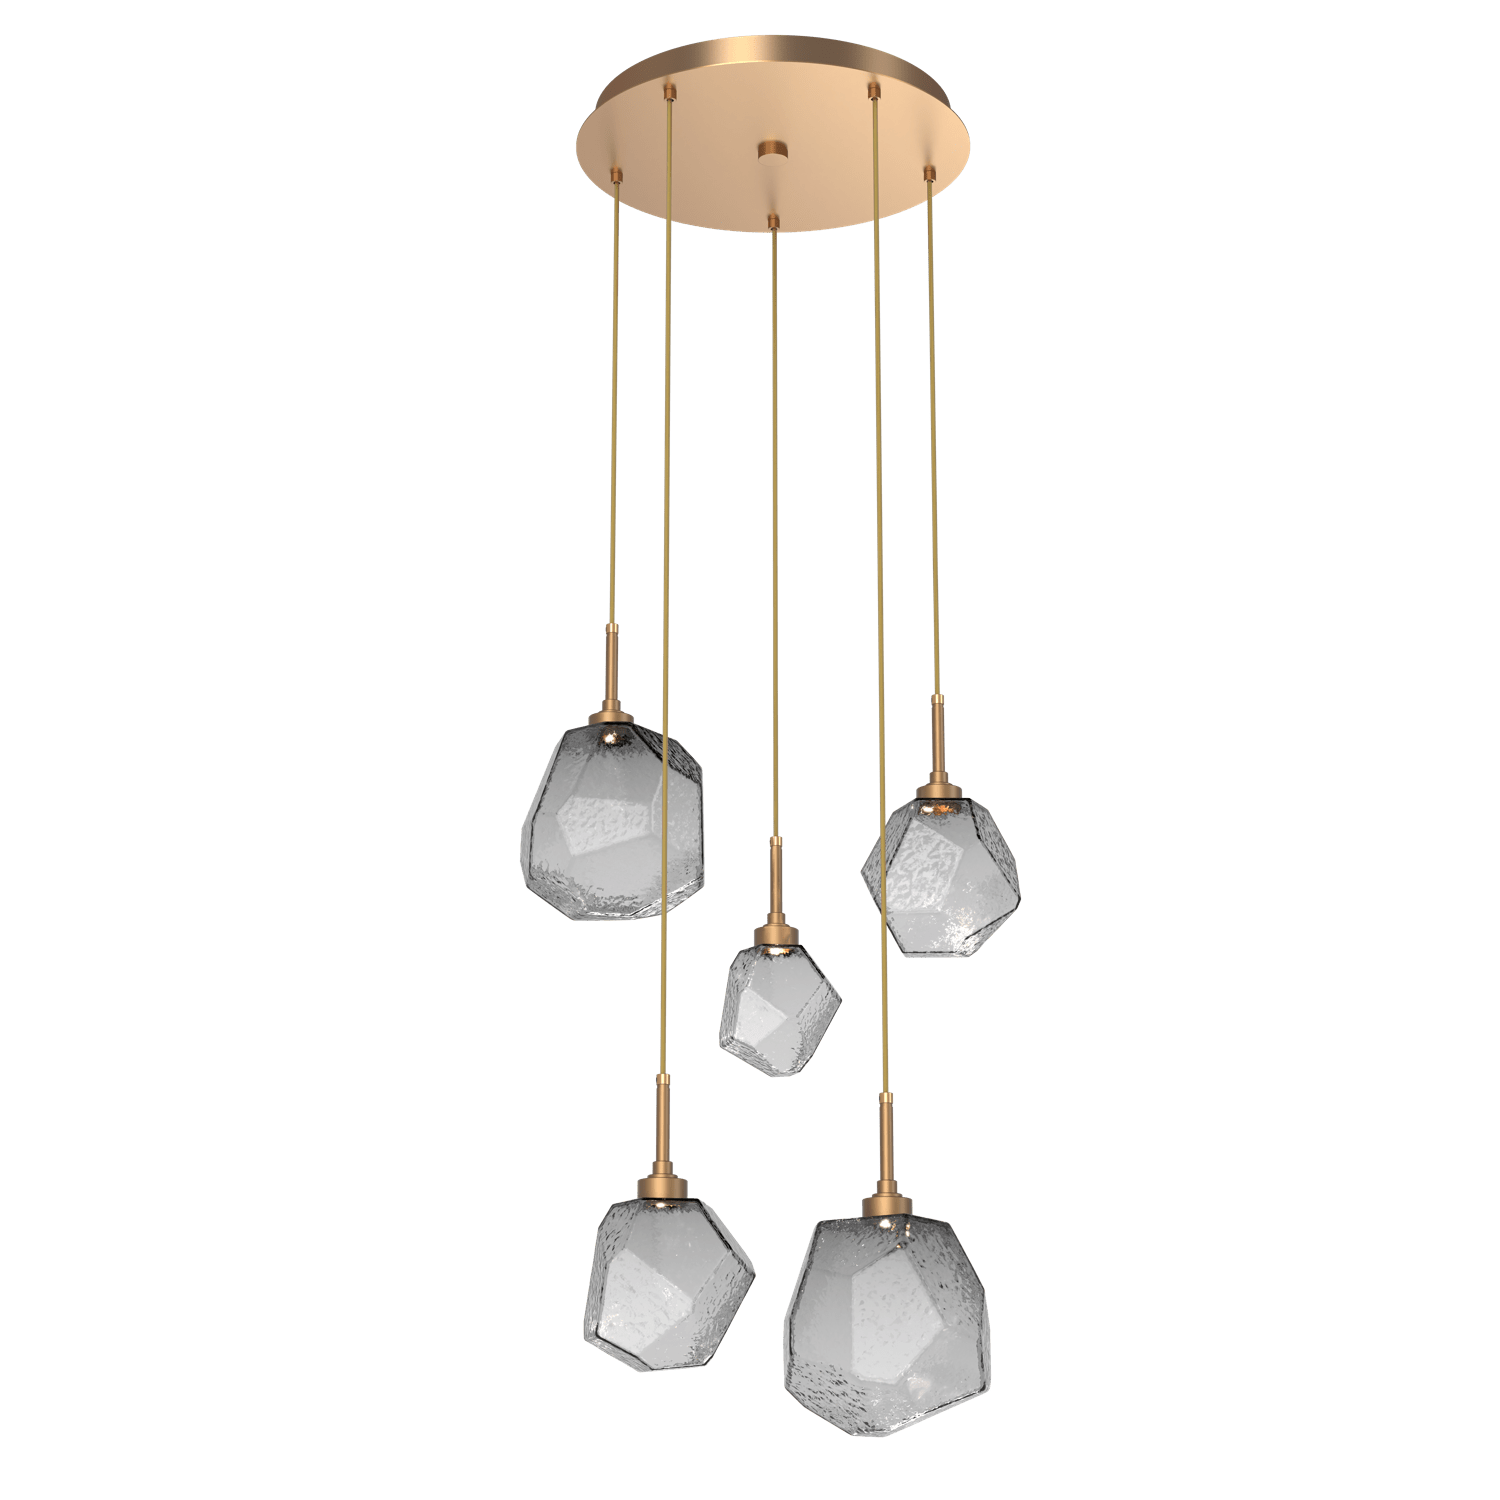 CHB0039-05-NB-S-Hammerton-Studio-Gem-5-light-round-pendant-chandelier-with-novel-brass-finish-and-smoke-blown-glass-shades-and-LED-lamping